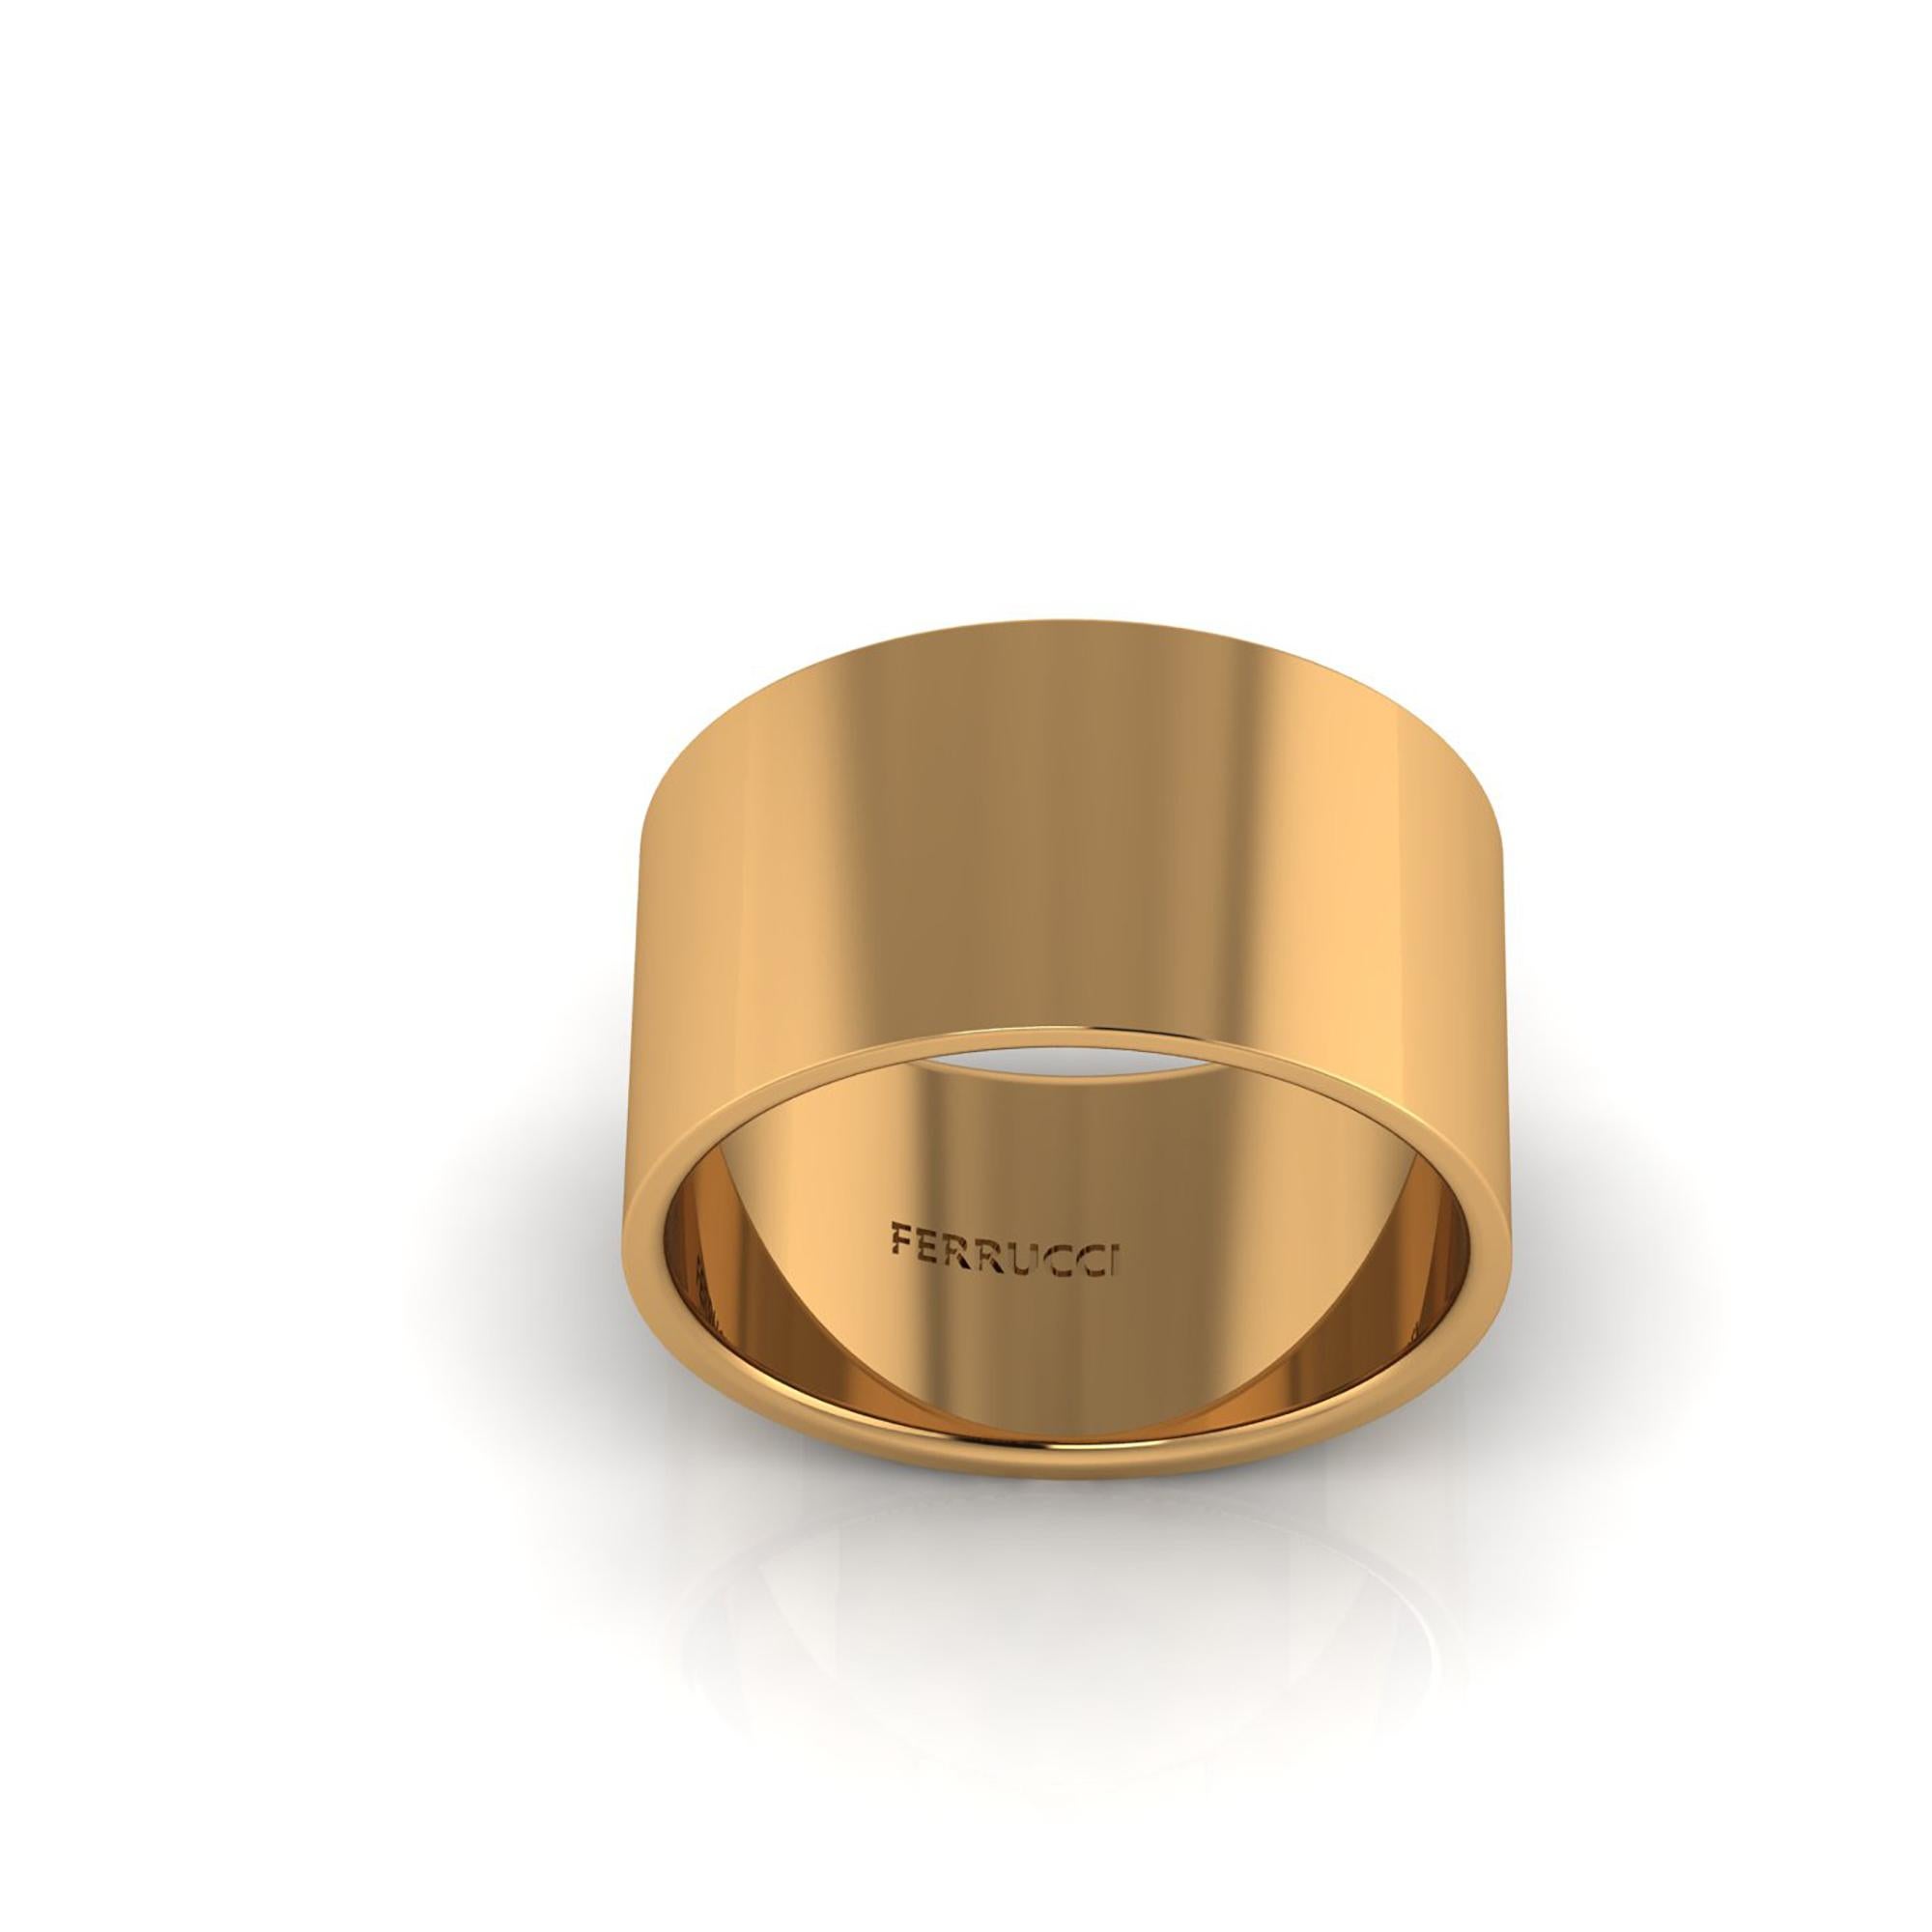 Solid 18k gold wide band ring, flat profile, stackable rings, comfortable fit, bold modern design, clean solid gold
Wear single or multiple flat bands for different looks, discount available for multiple orders, bulk price available.
Custom orders